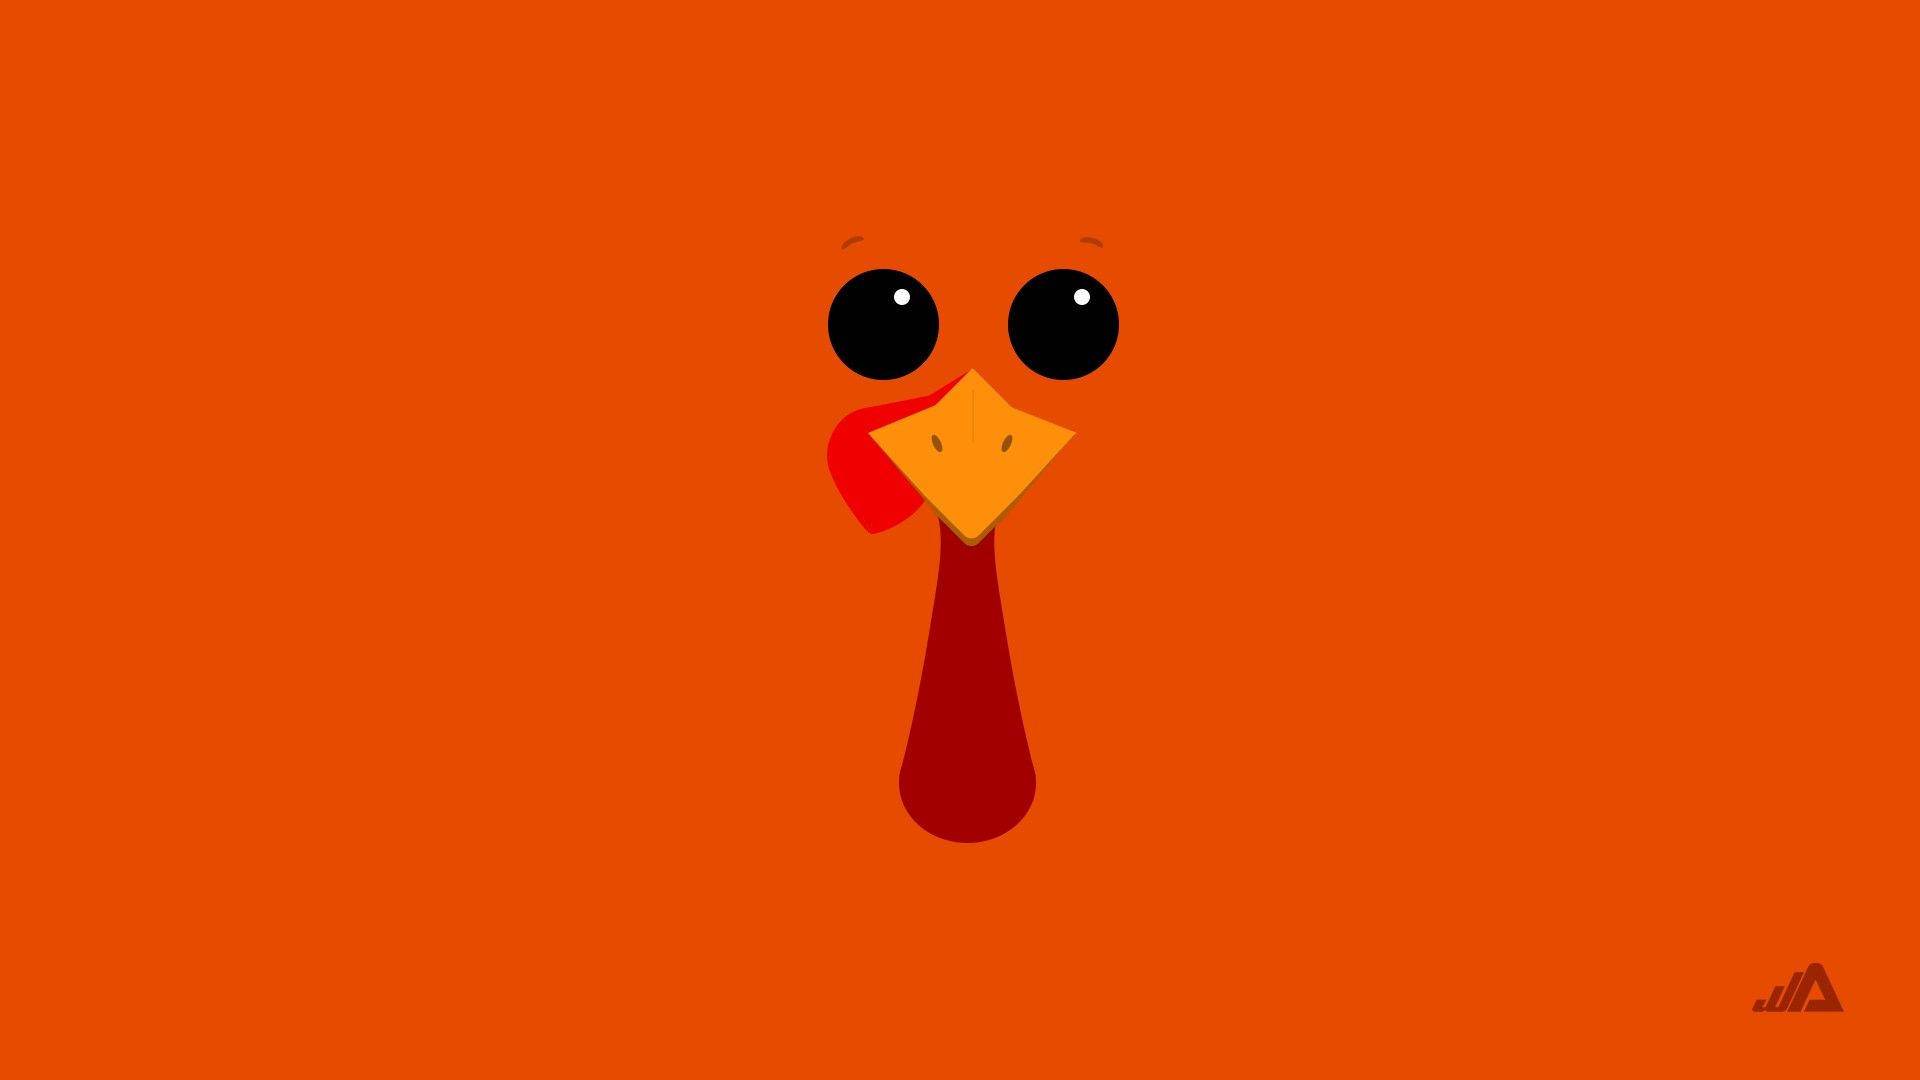 "Delicious Thanksgiving Turkey - Feast with family!" Wallpaper